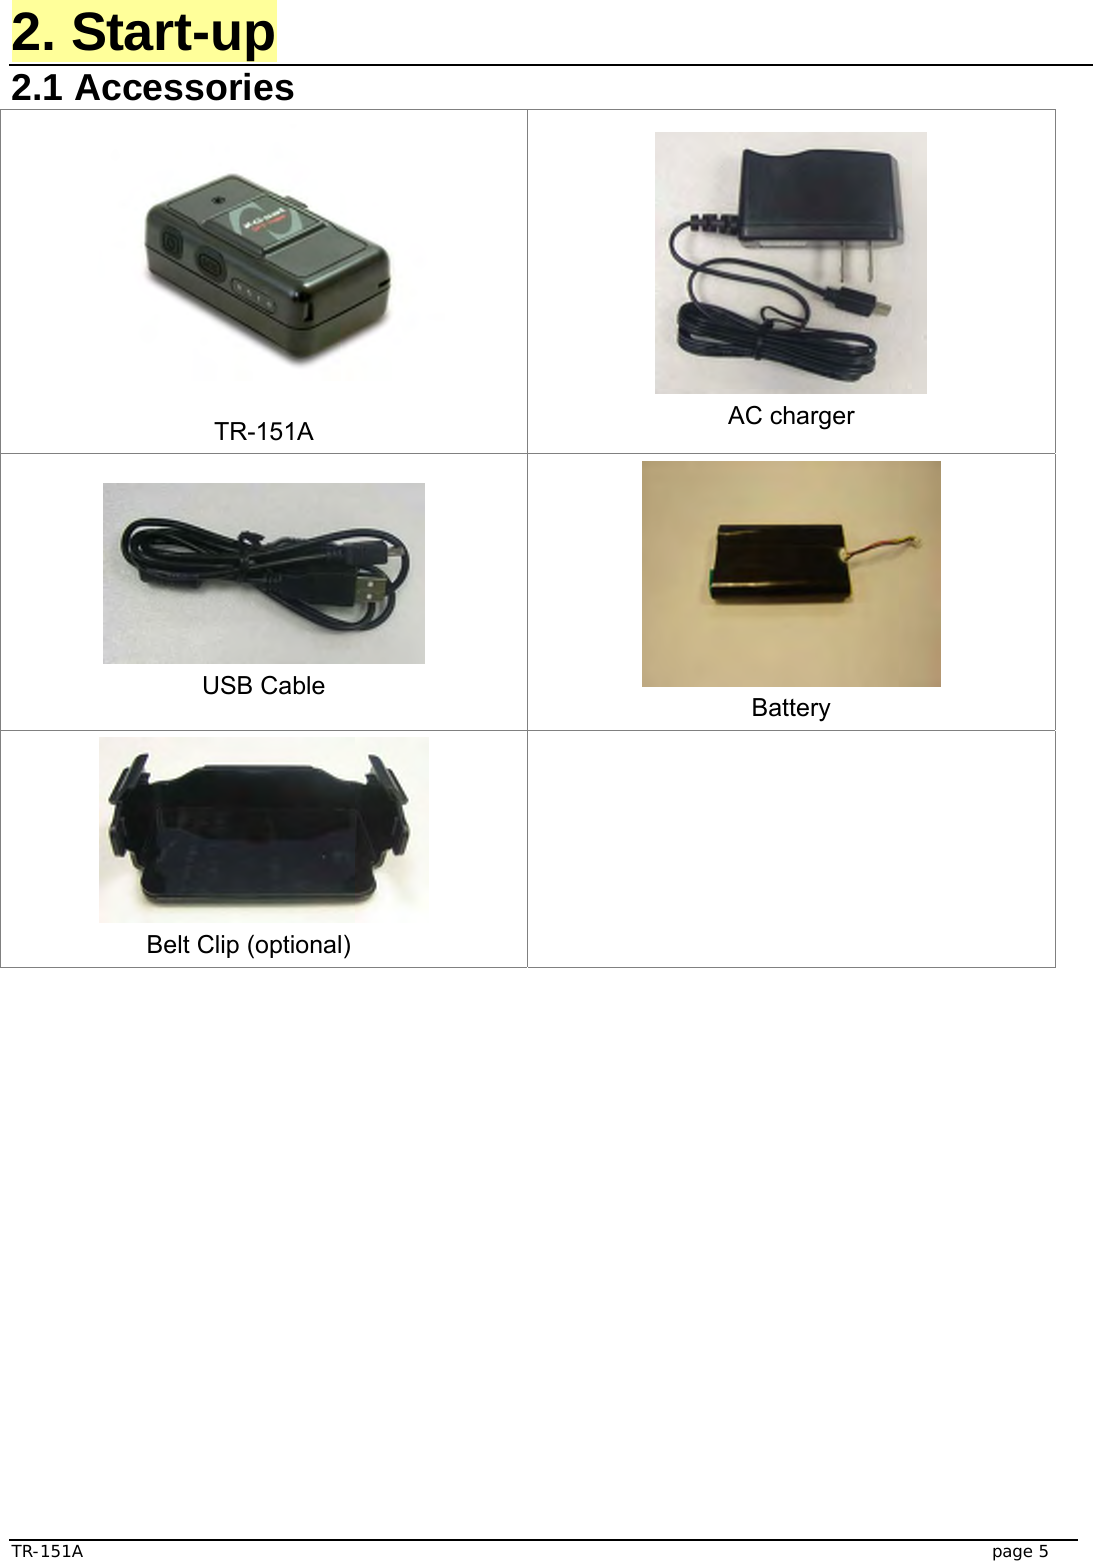  TR-151A   page 5 2. Start-up 2.1 Accessories    TR-151A  AC charger  USB Cable   Battery                  Belt Clip (optional)     